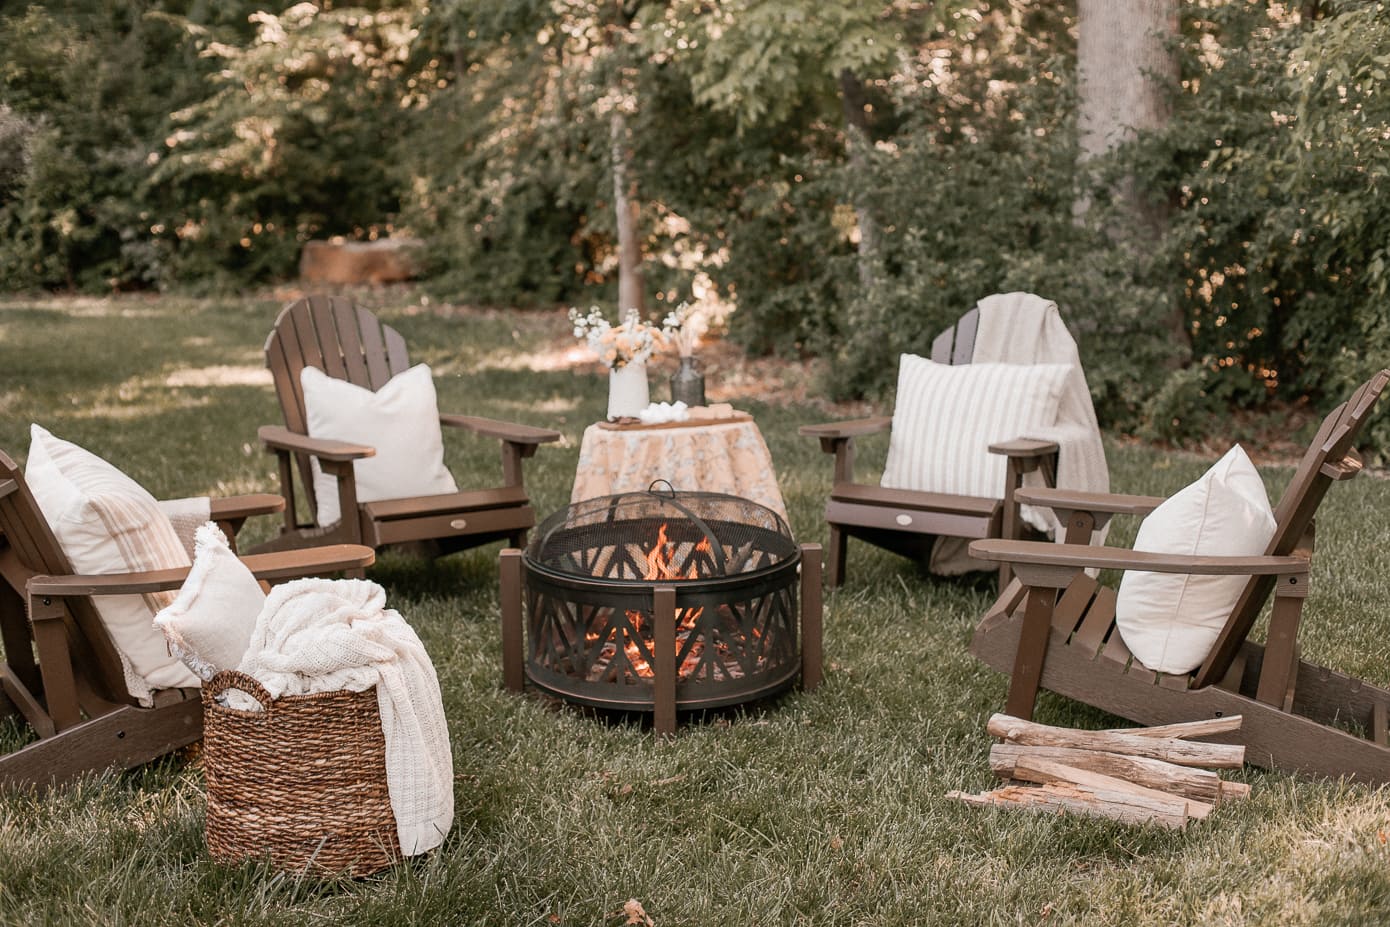 Outdoor decorating ideas featuring firepit with chairs around it